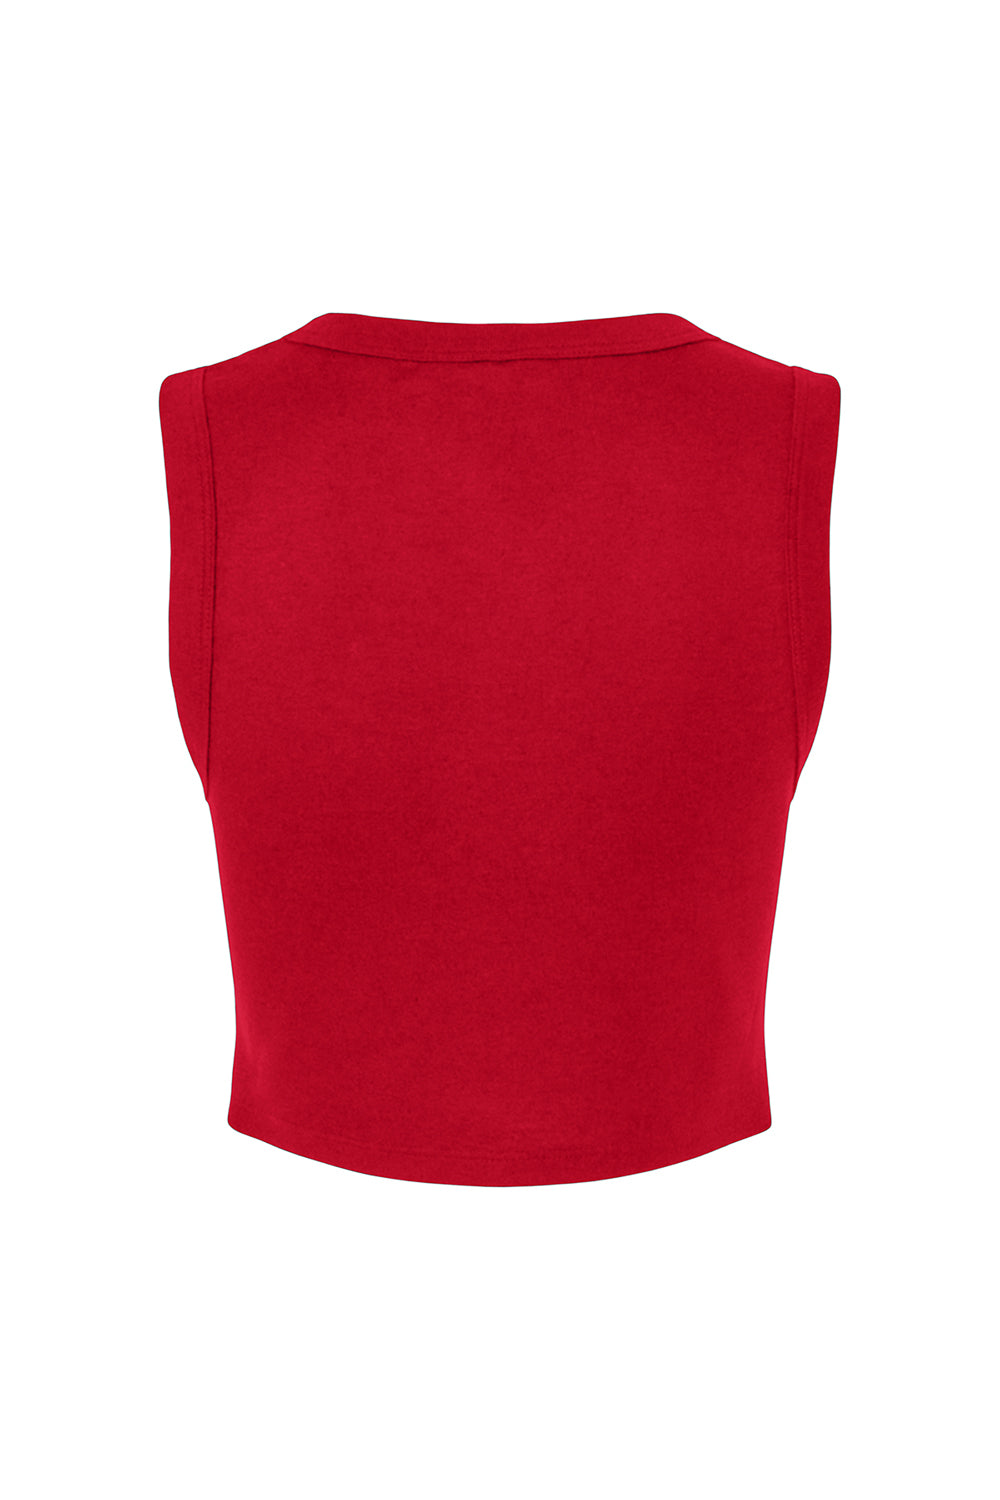 Bella + Canvas 1013BE Womens Micro Ribbed Muscle Crop Tank Top Red Flat Back